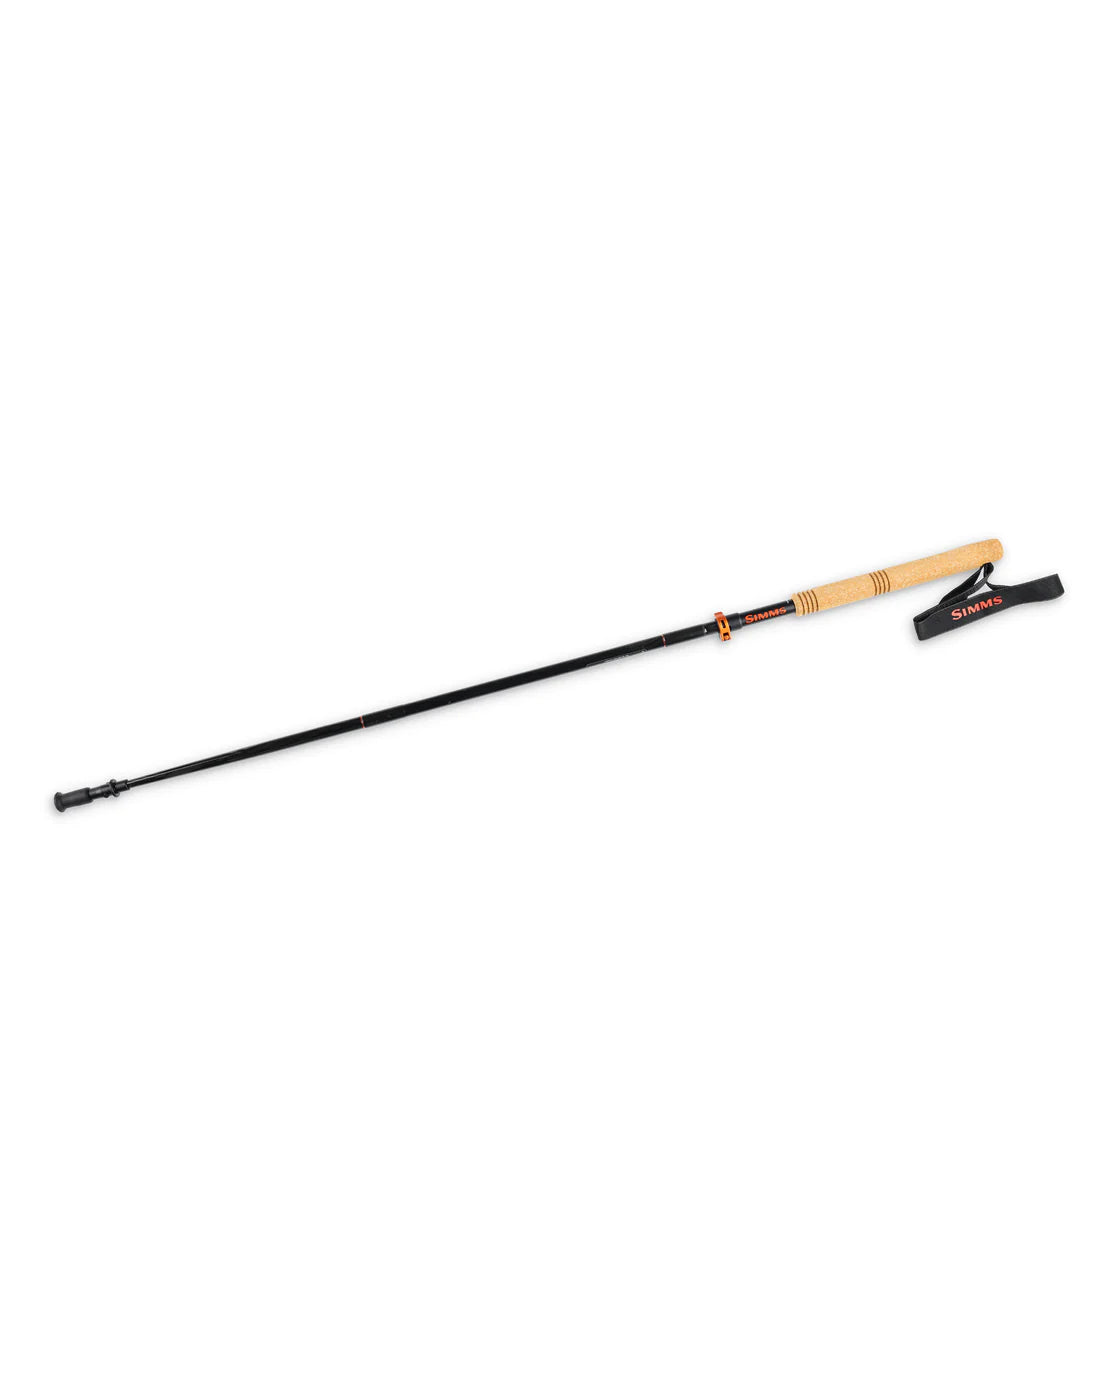 Simms Pro Wading Staff - Black -  - Mansfield Hunting & Fishing - Products to prepare for Corona Virus